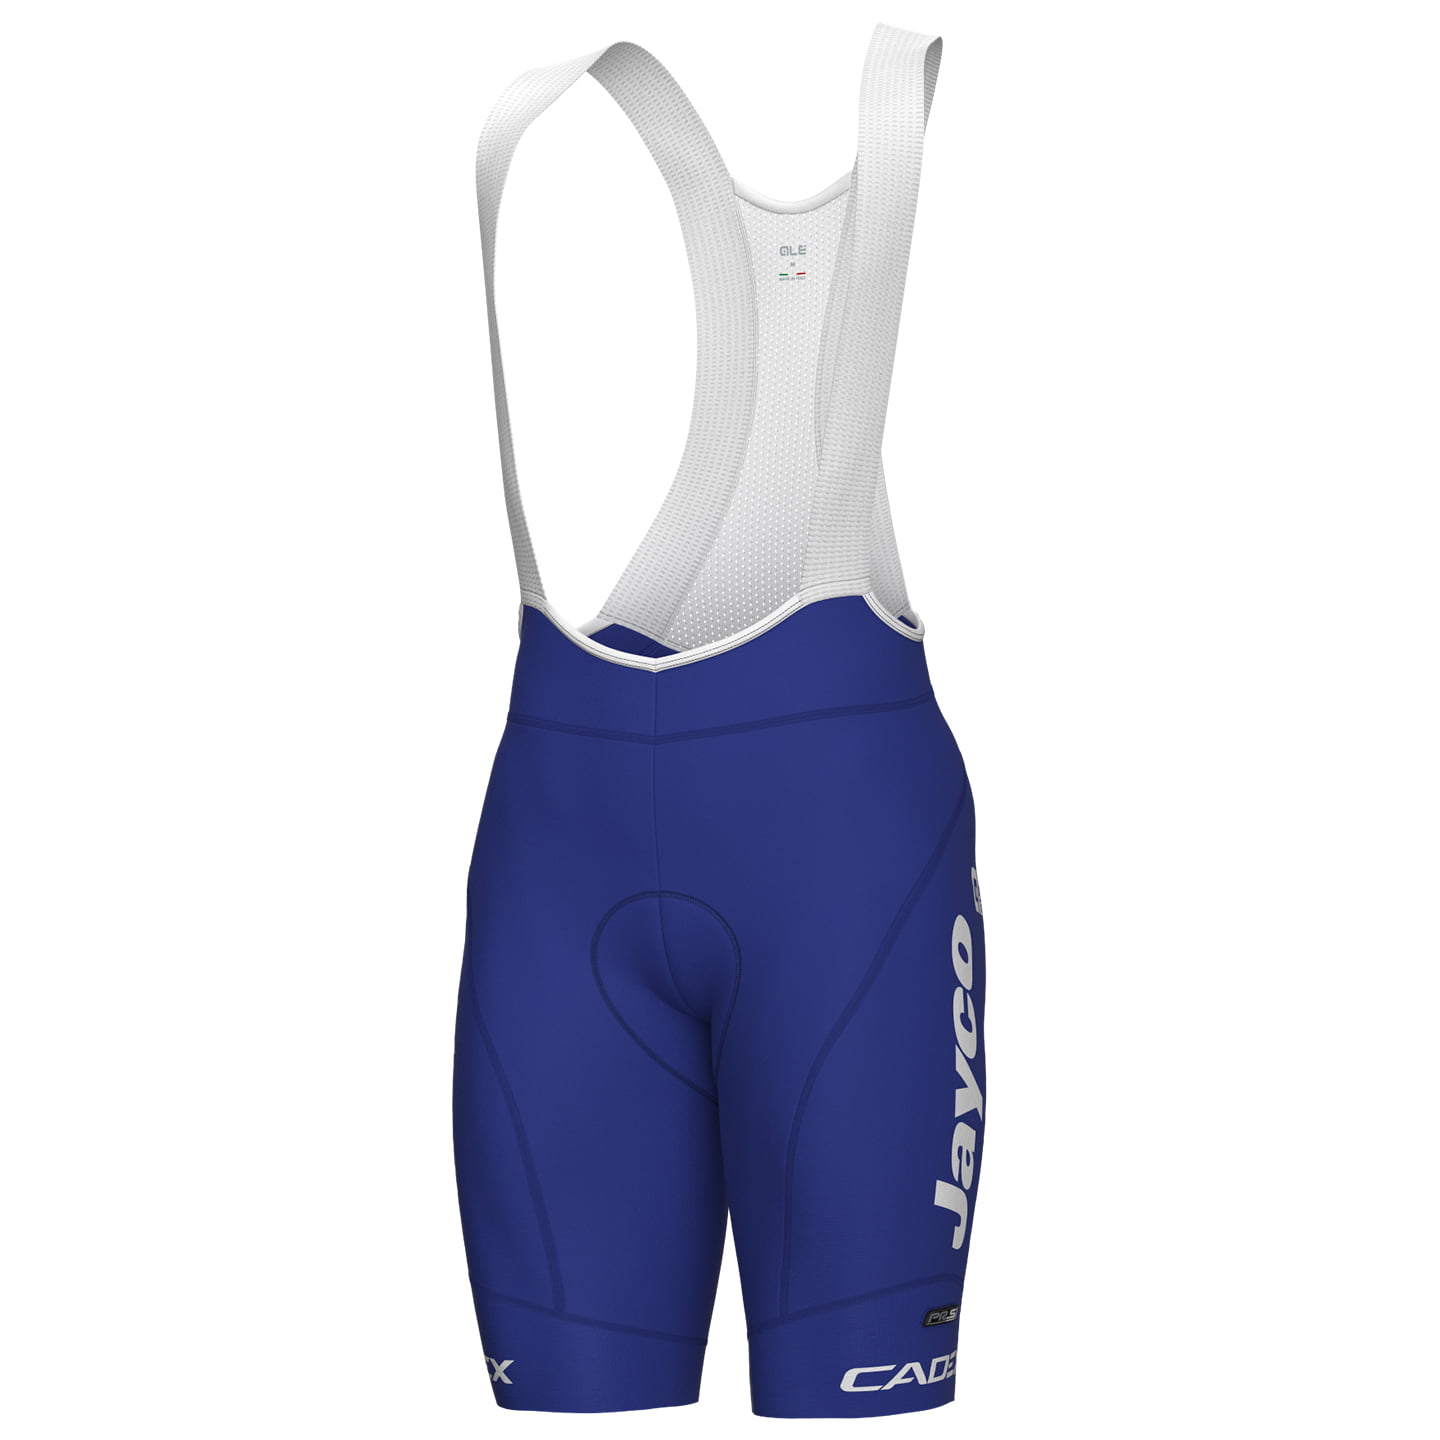 TEAM JAYCO-ALULA PR.S 2023 Bib Shorts, for men, size 2XL, Cycle trousers, Cycle gear